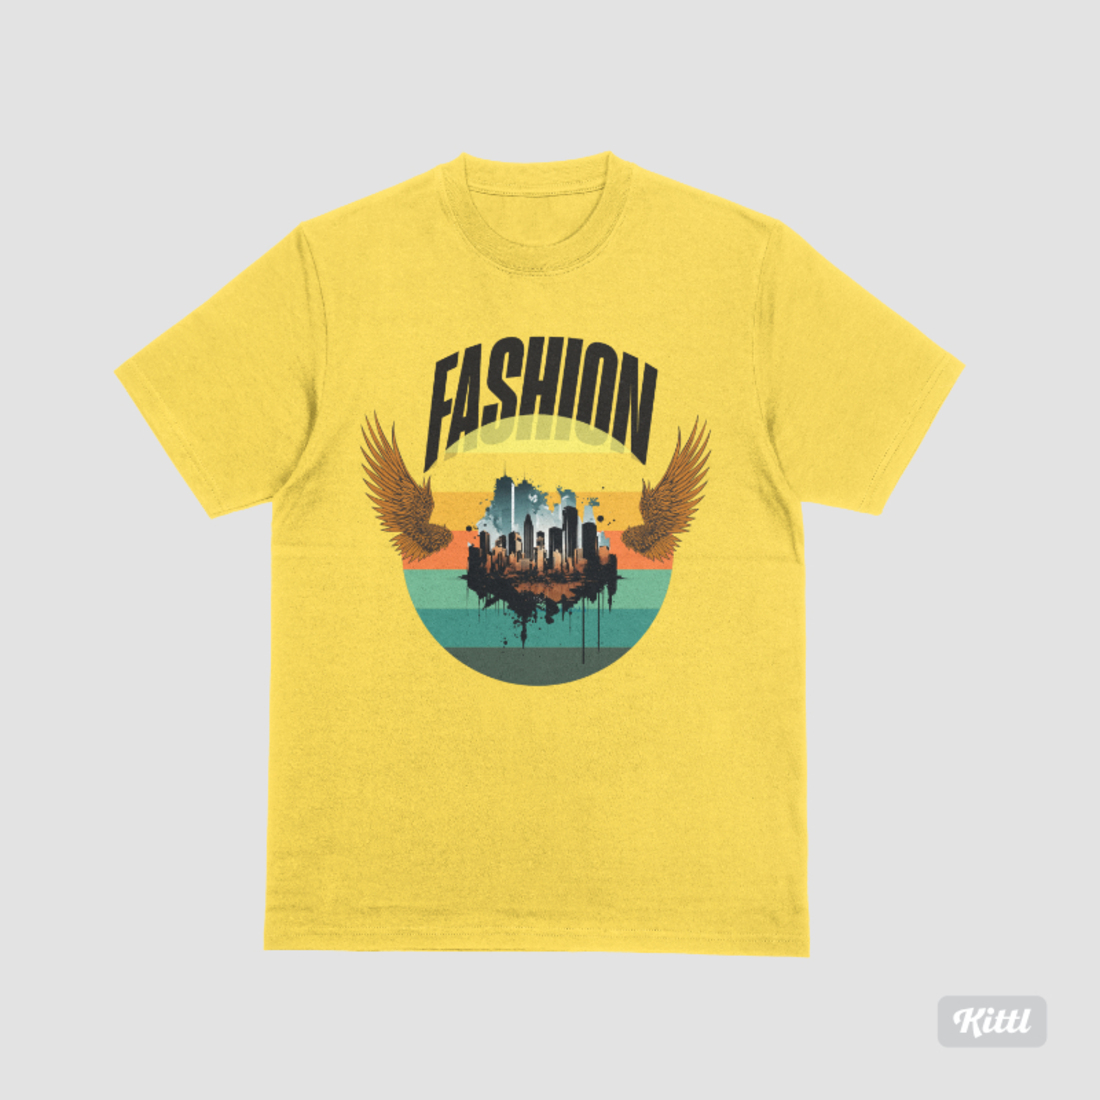 Fashionable T-Shirt Design preview image.